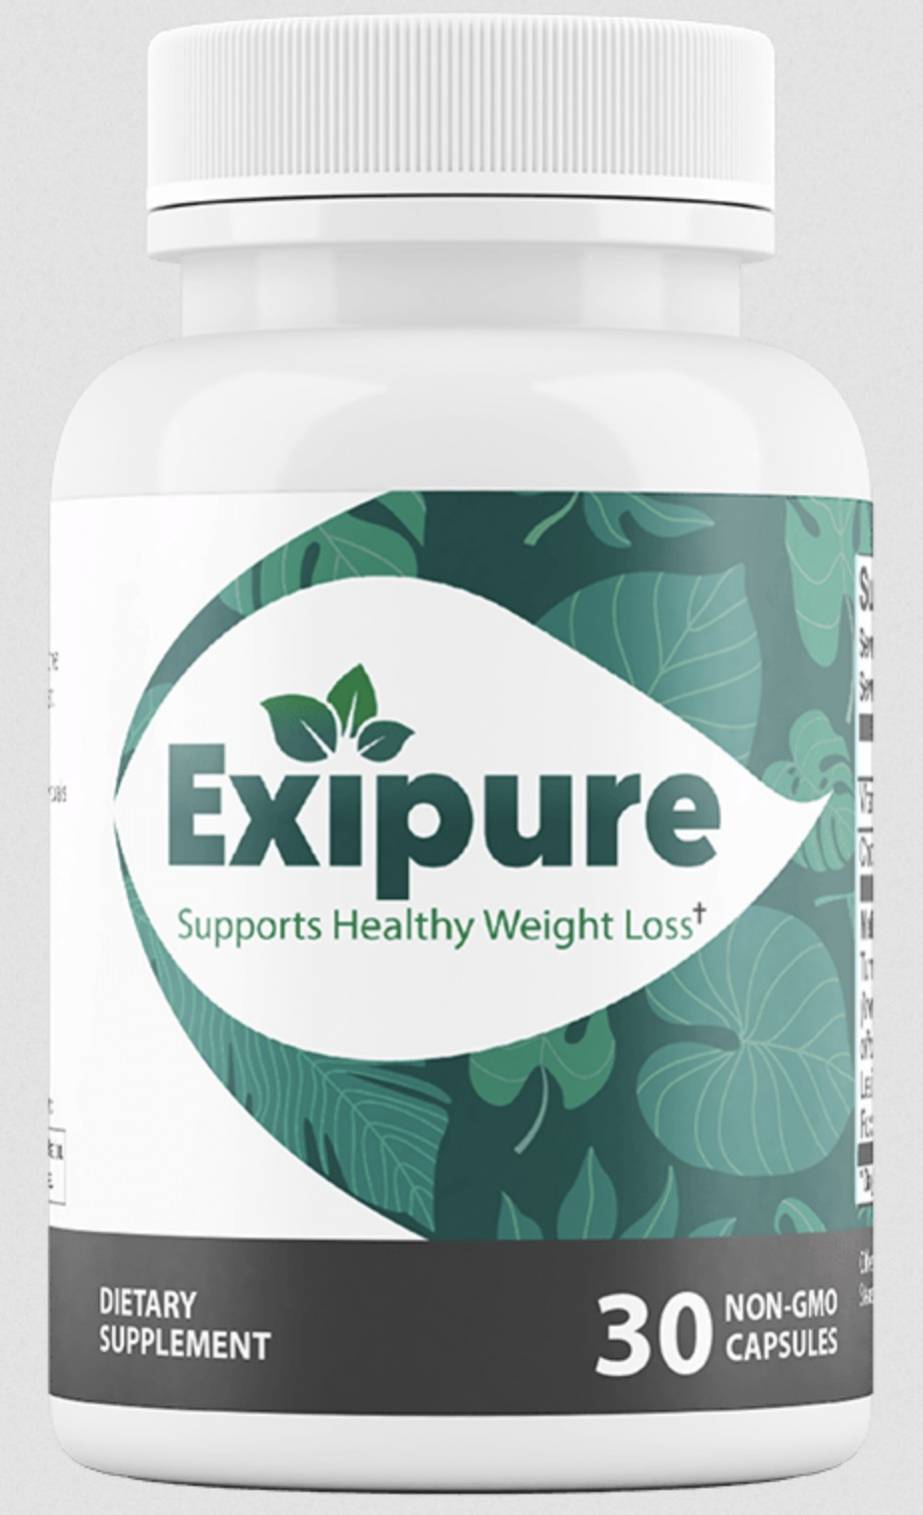 Exipure Supplement Review